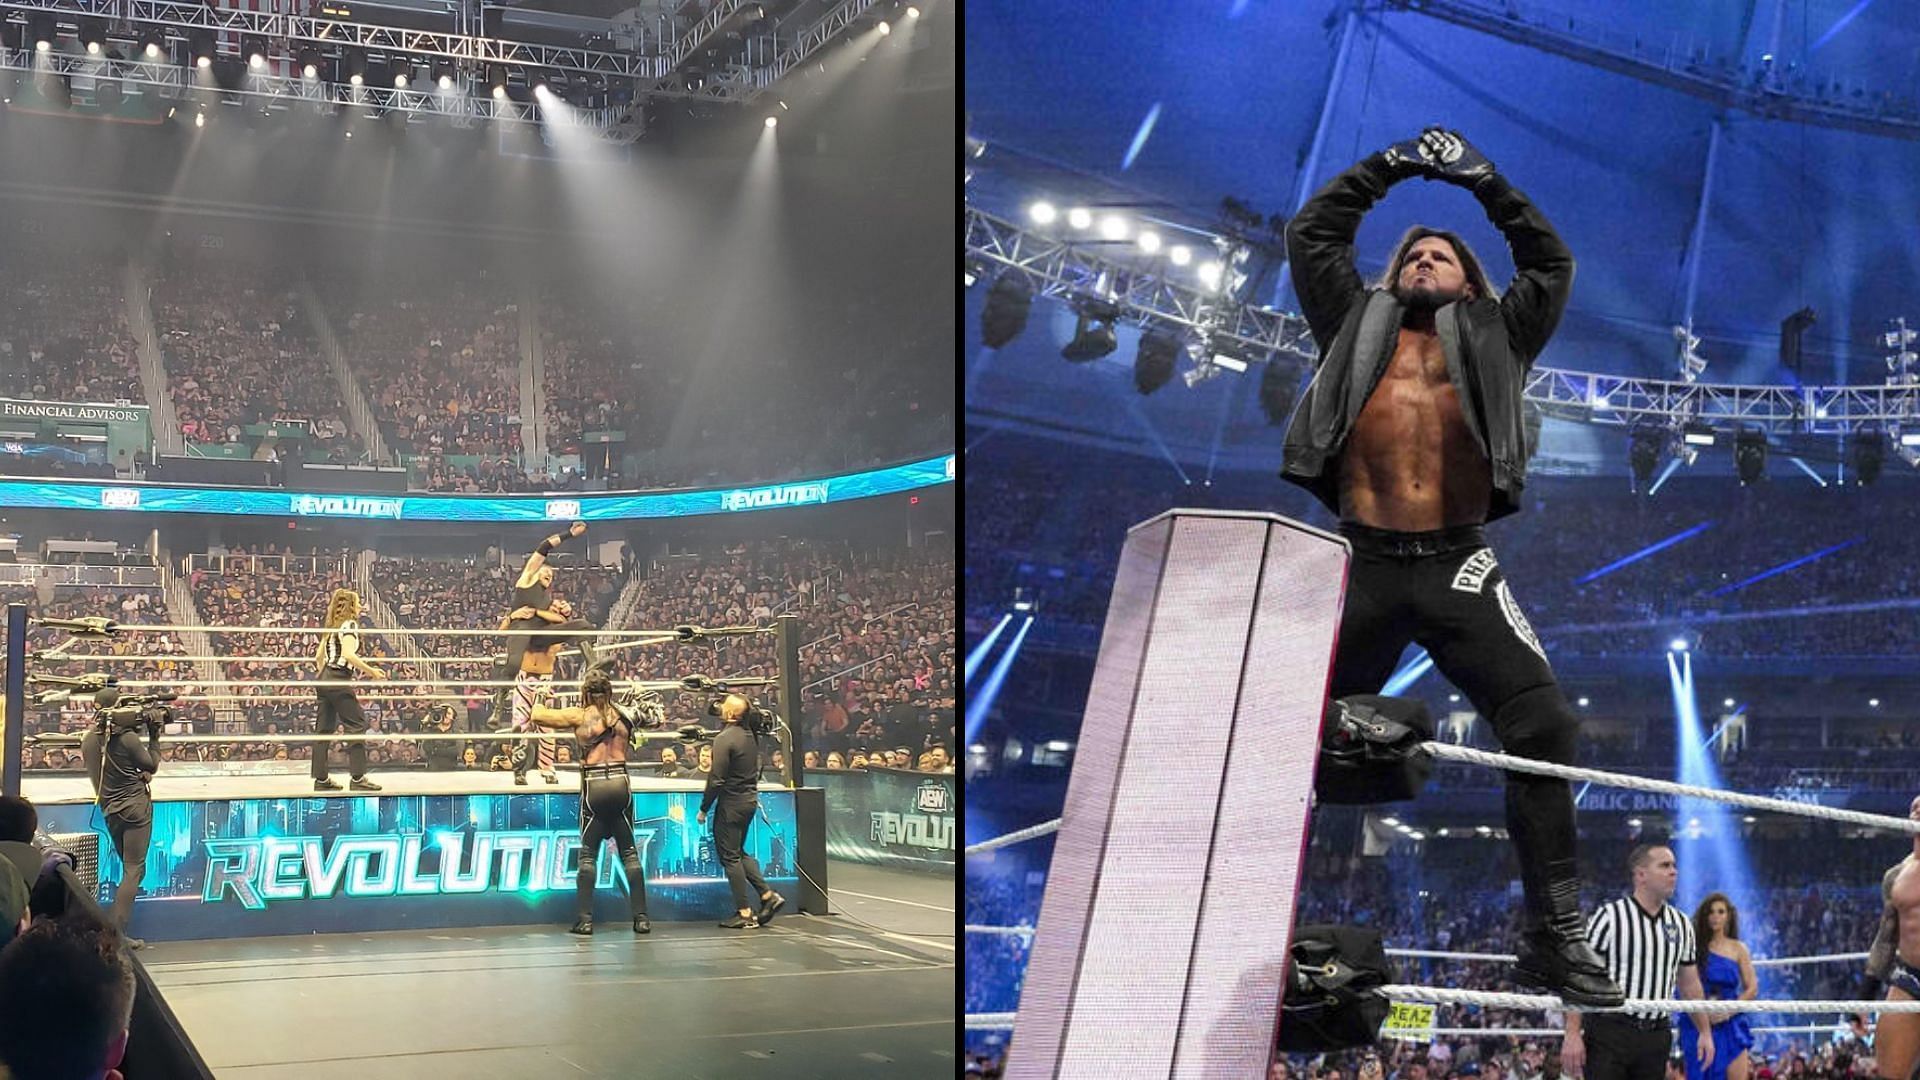 AJ Styles is a former WWE Champion [Photo courtesy of WWE